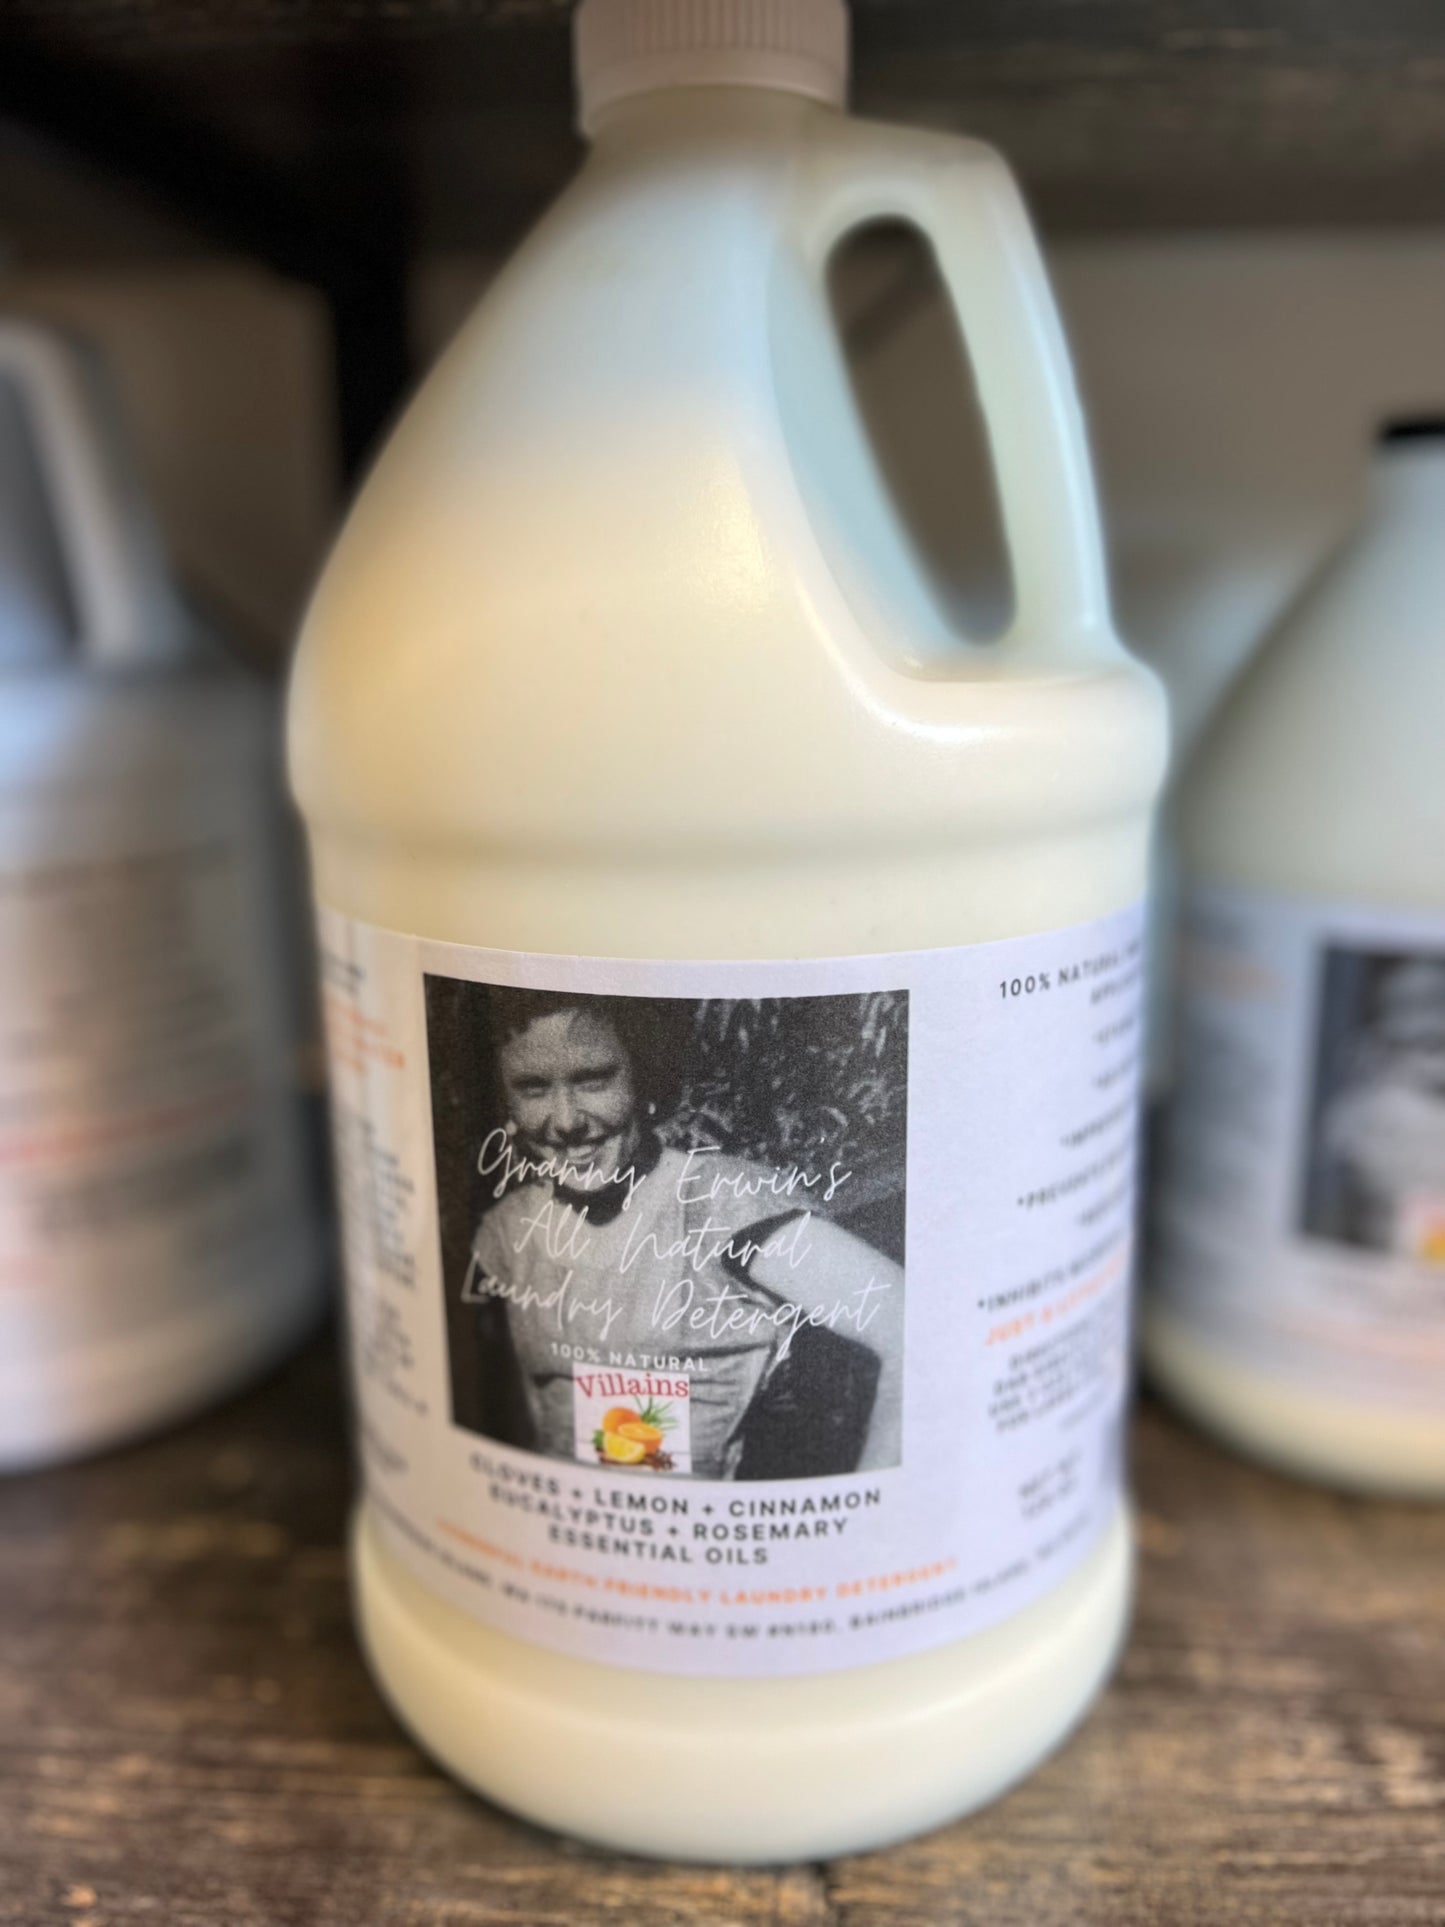 Granny Erwin's Great Smelling All Natural Laundry Detergent & Fabric Softener w/Villains Essential Oil Blend